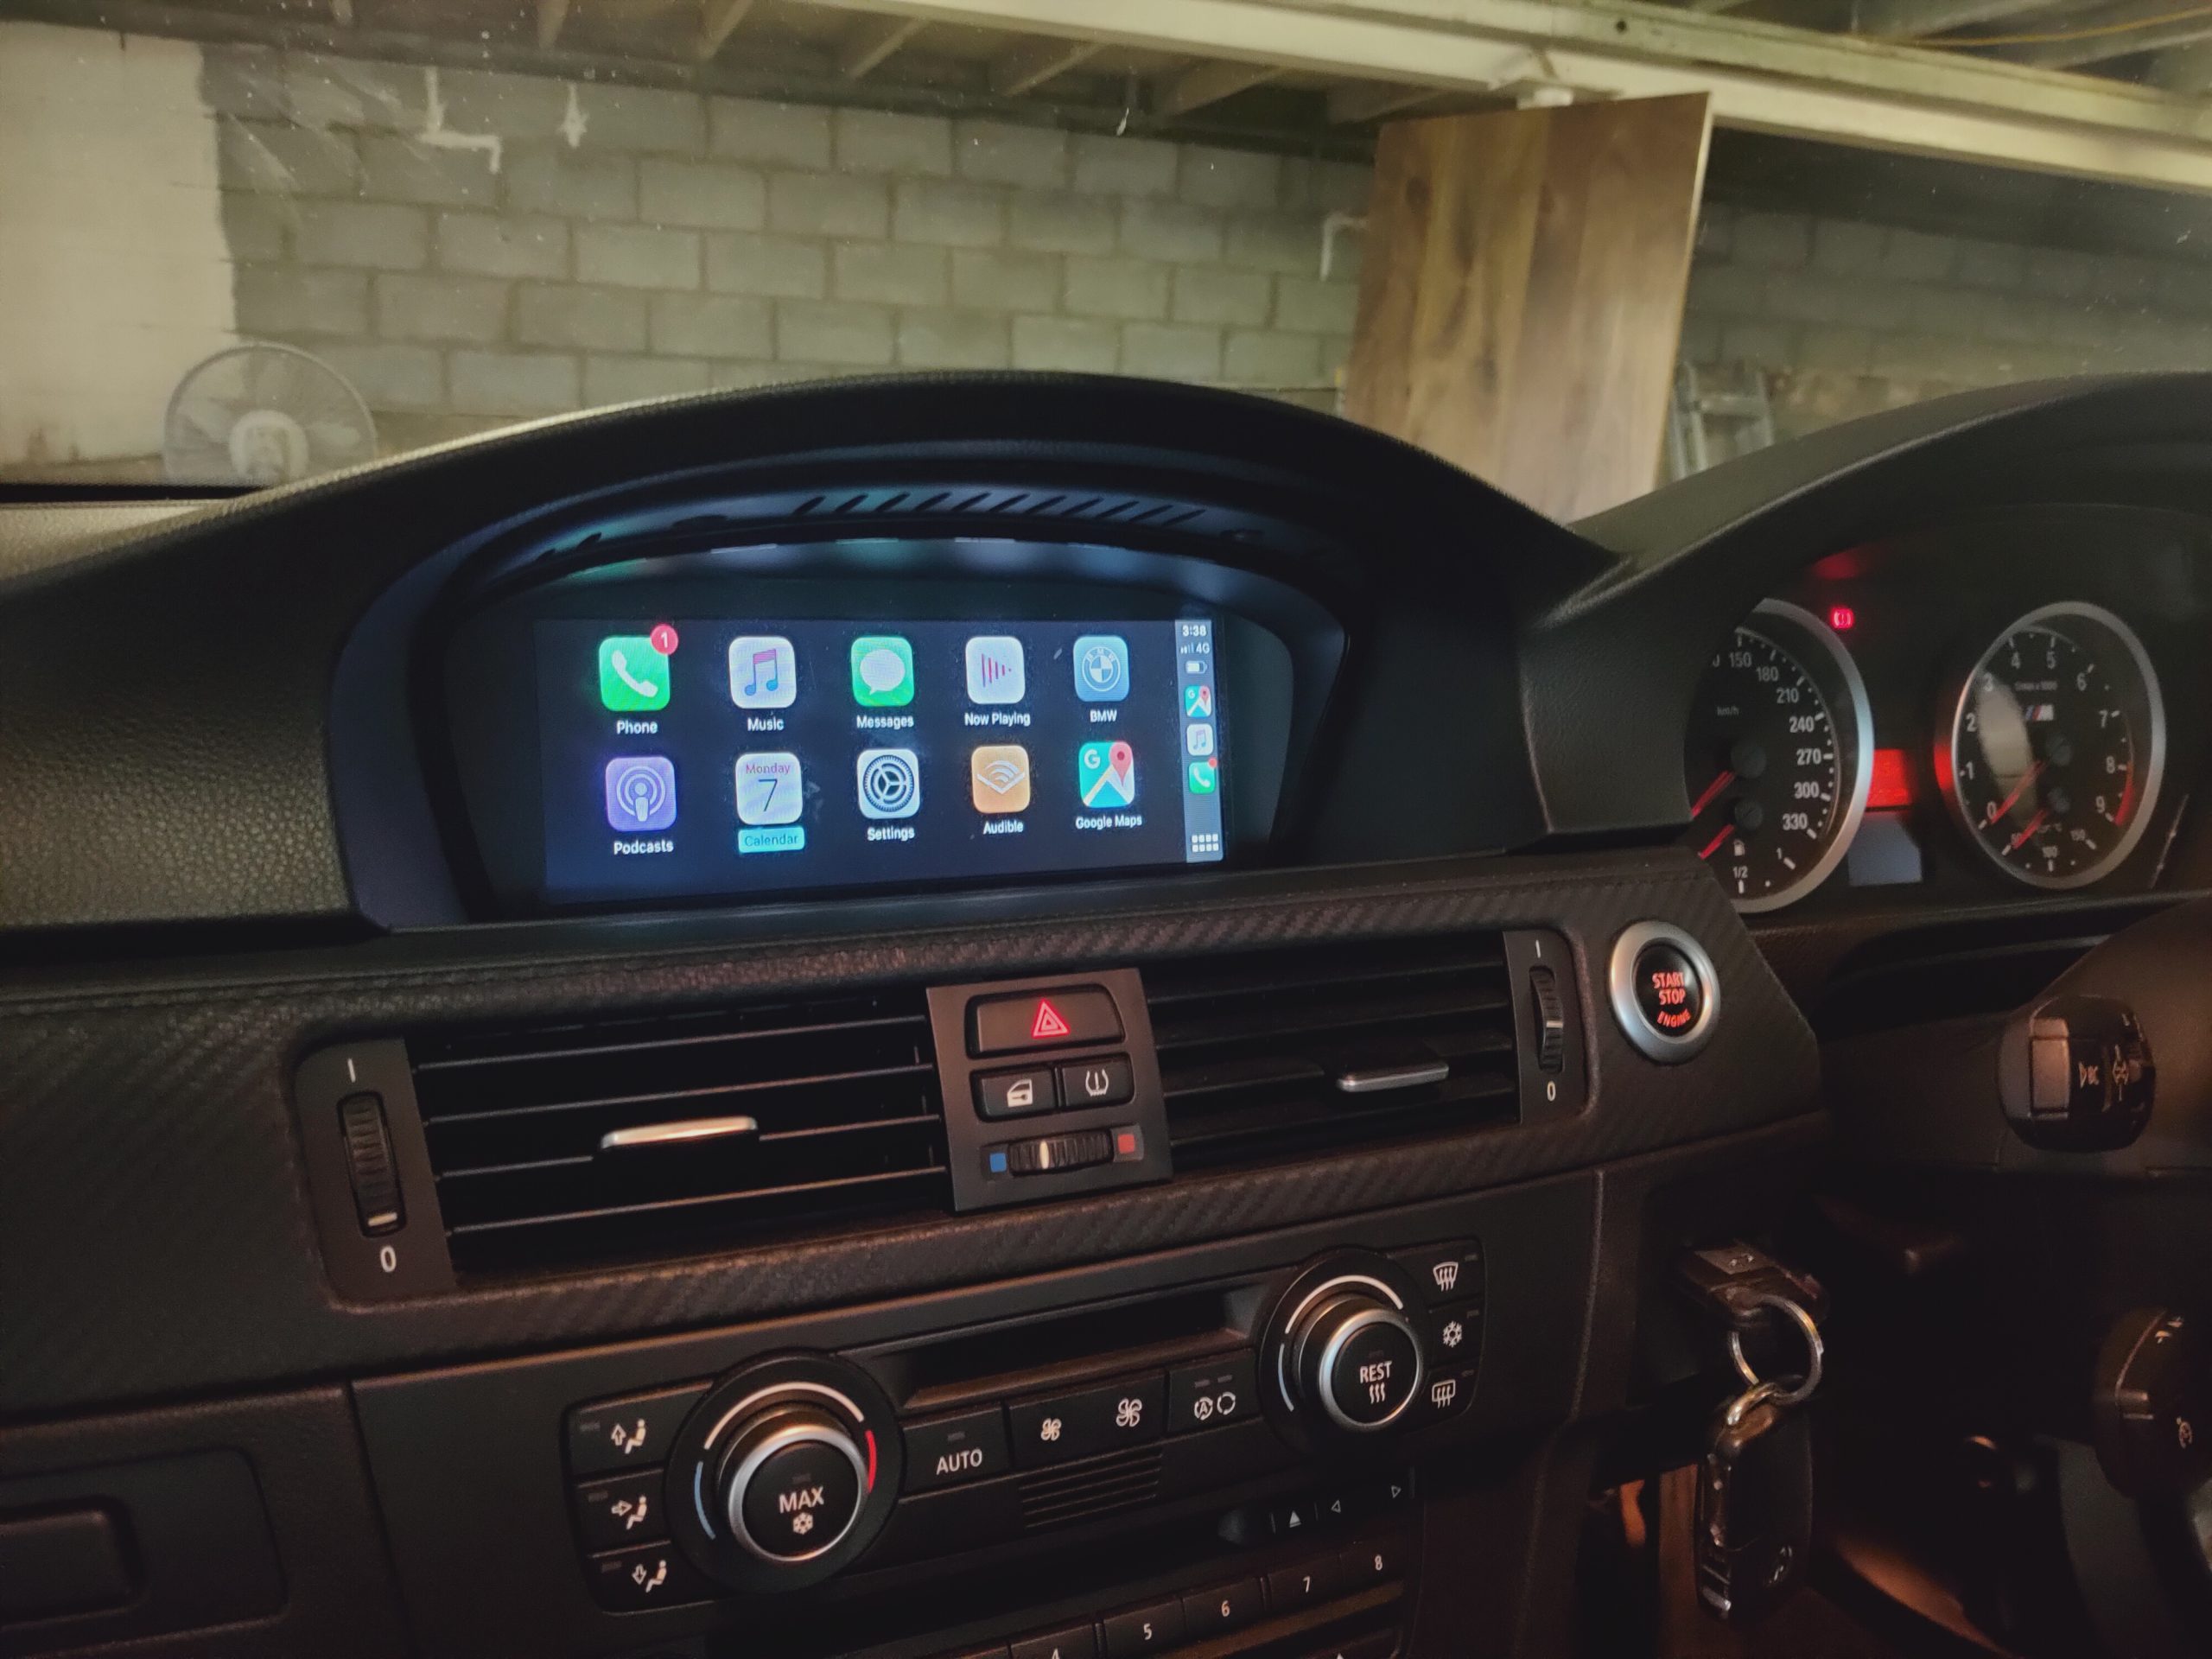 BMW-2: CCC iDrive 8.8" widesreen - OEM upgrade with Wireless Apple CarPlay and Android Auto